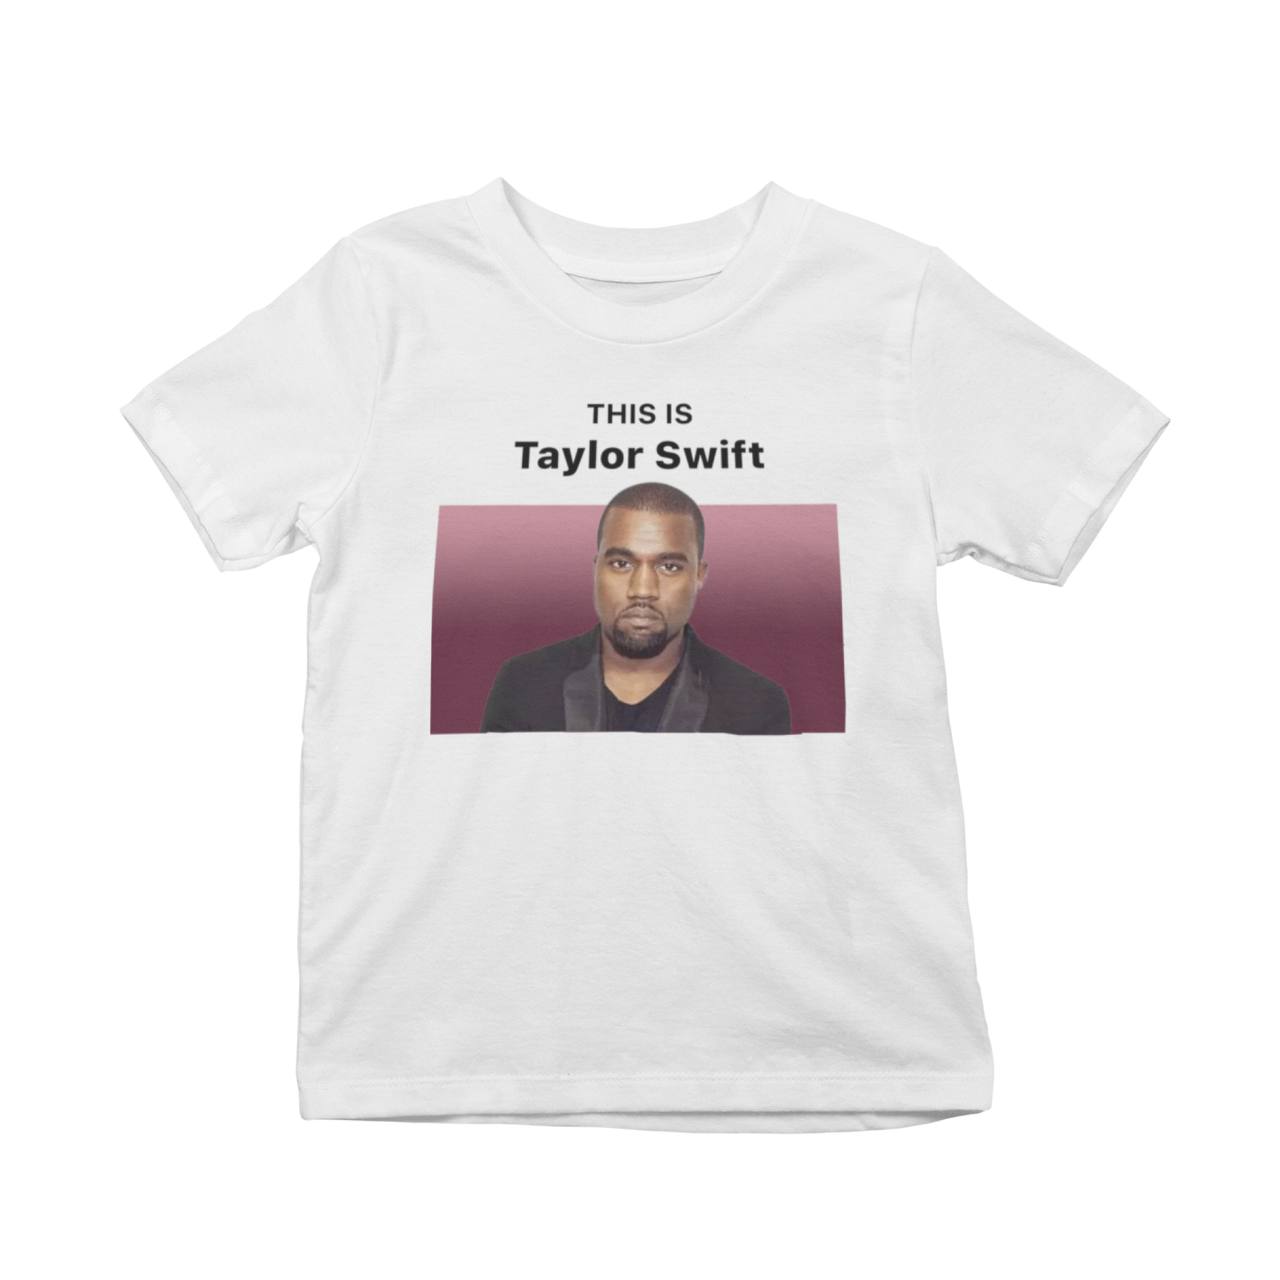 This Is Taylor Swift (Kanye West) T-Shirt